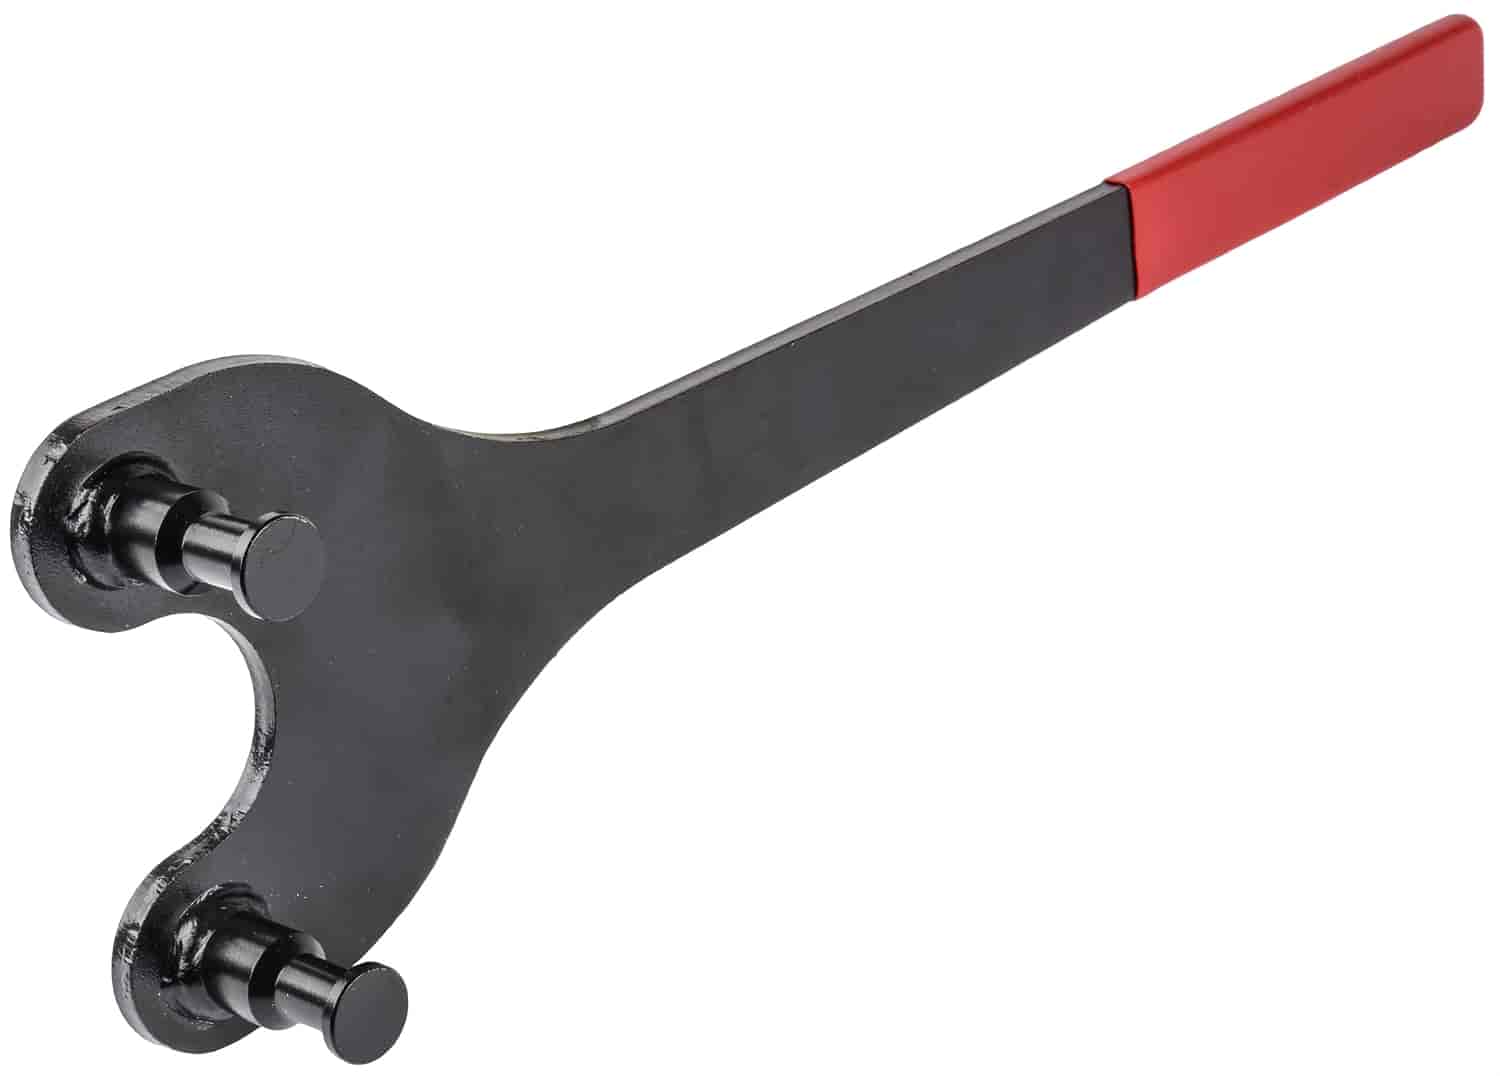 Camshaft Pulley Holding Tool